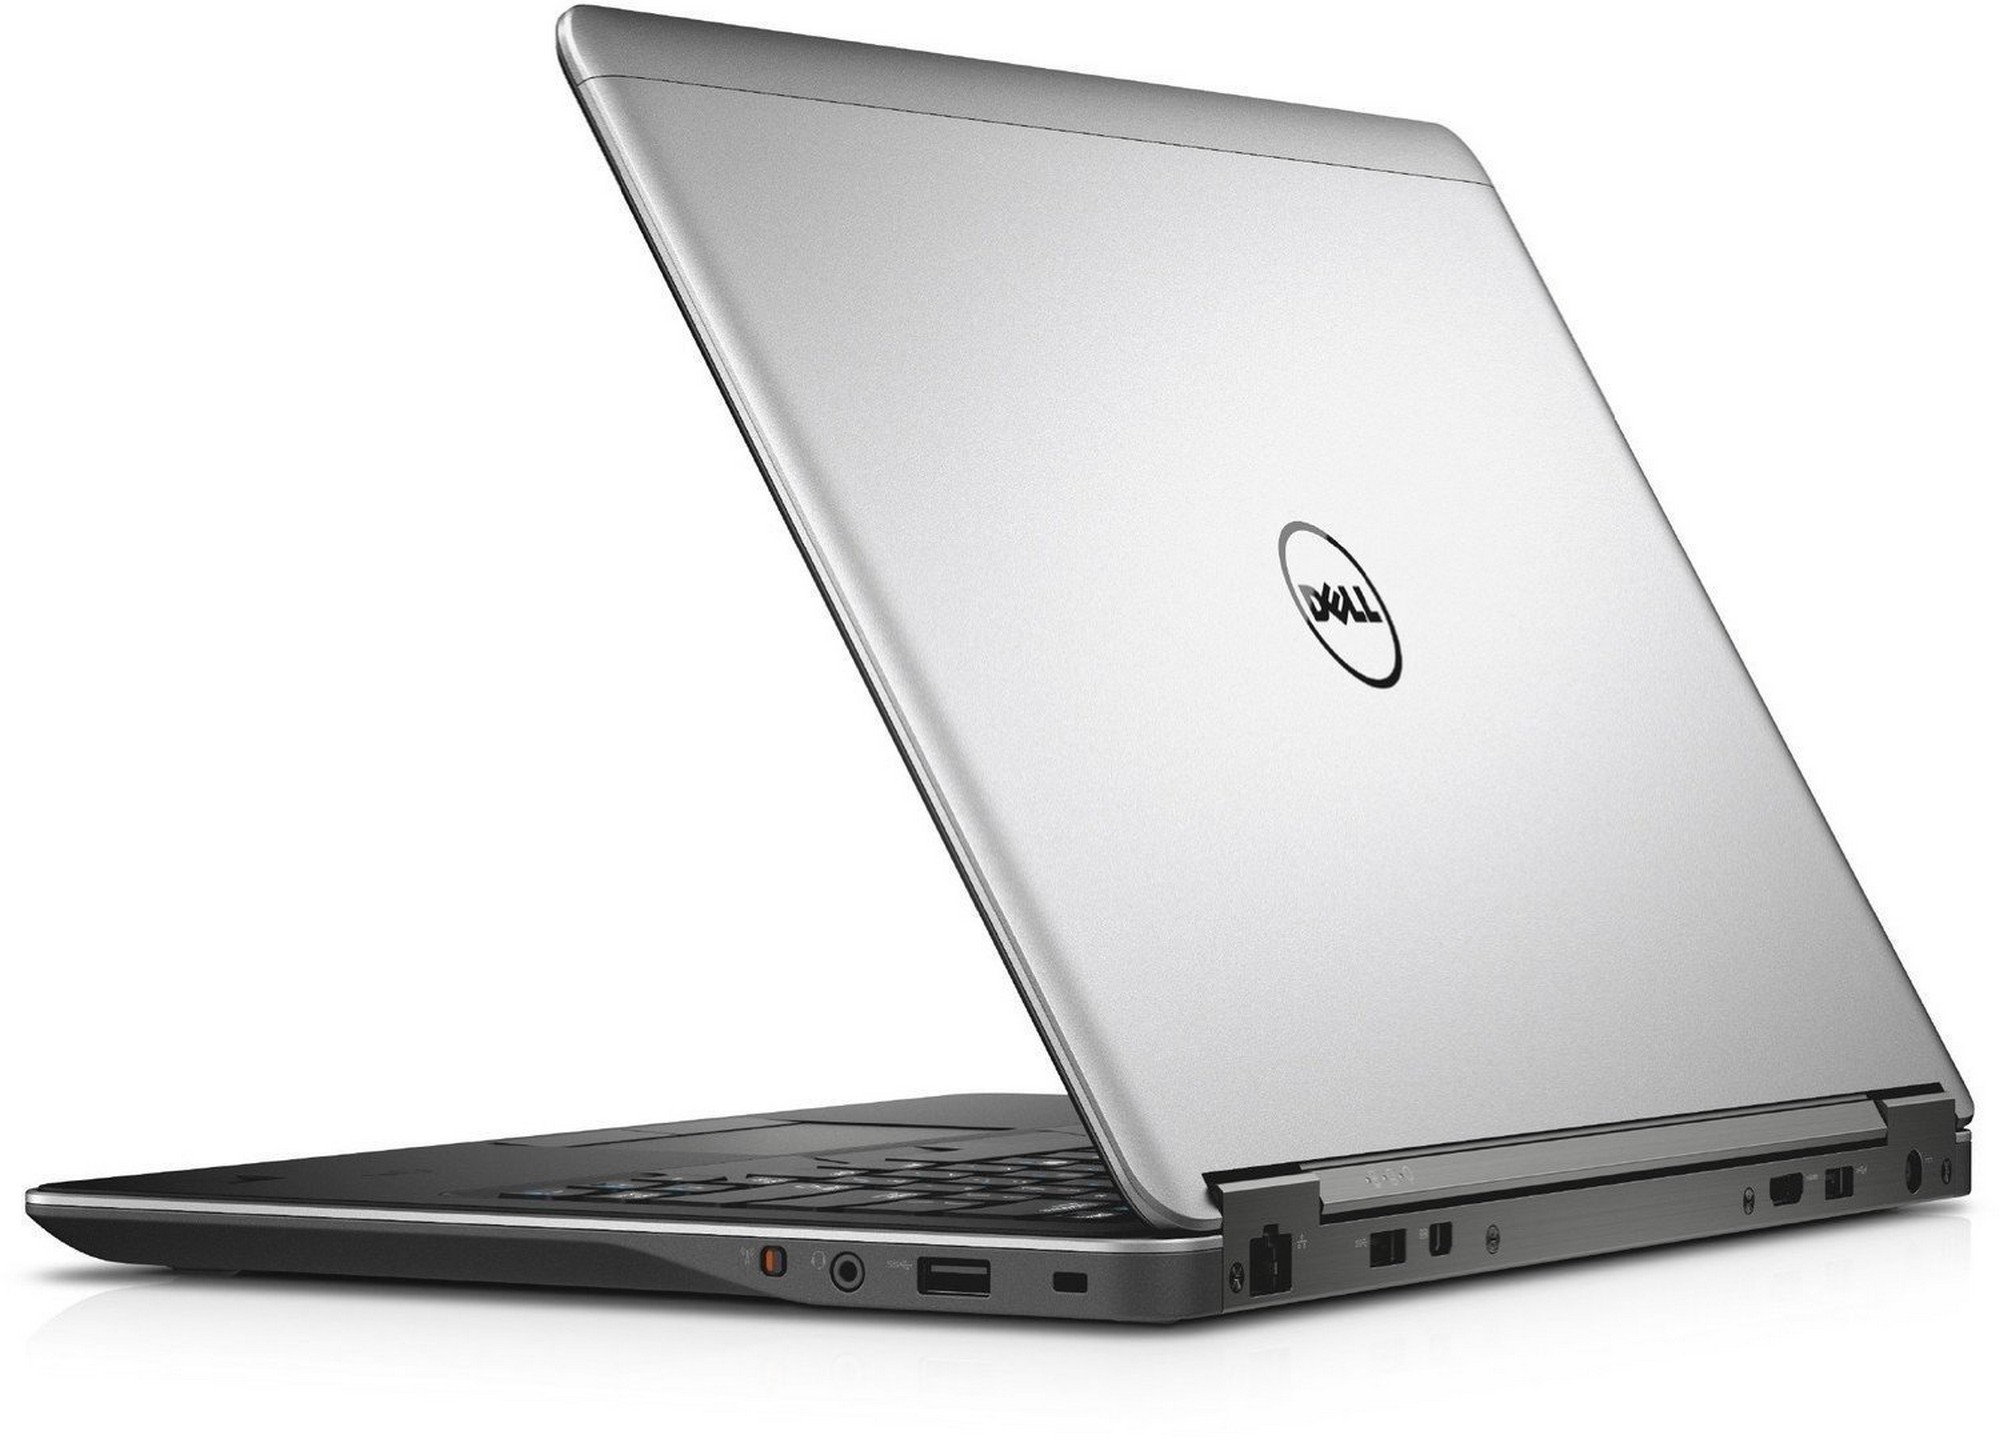 Dell Latitude E7440 Laptop Computer, 1.90 GHz Intel i5 Dual Core Gen 4, 16GB DDR3 RAM, 240GB Solid State Drive (SSD) SSD Hard Drive, Windows 10 Home 64 Bit, 14" Screen Refurbished - image 5 of 9